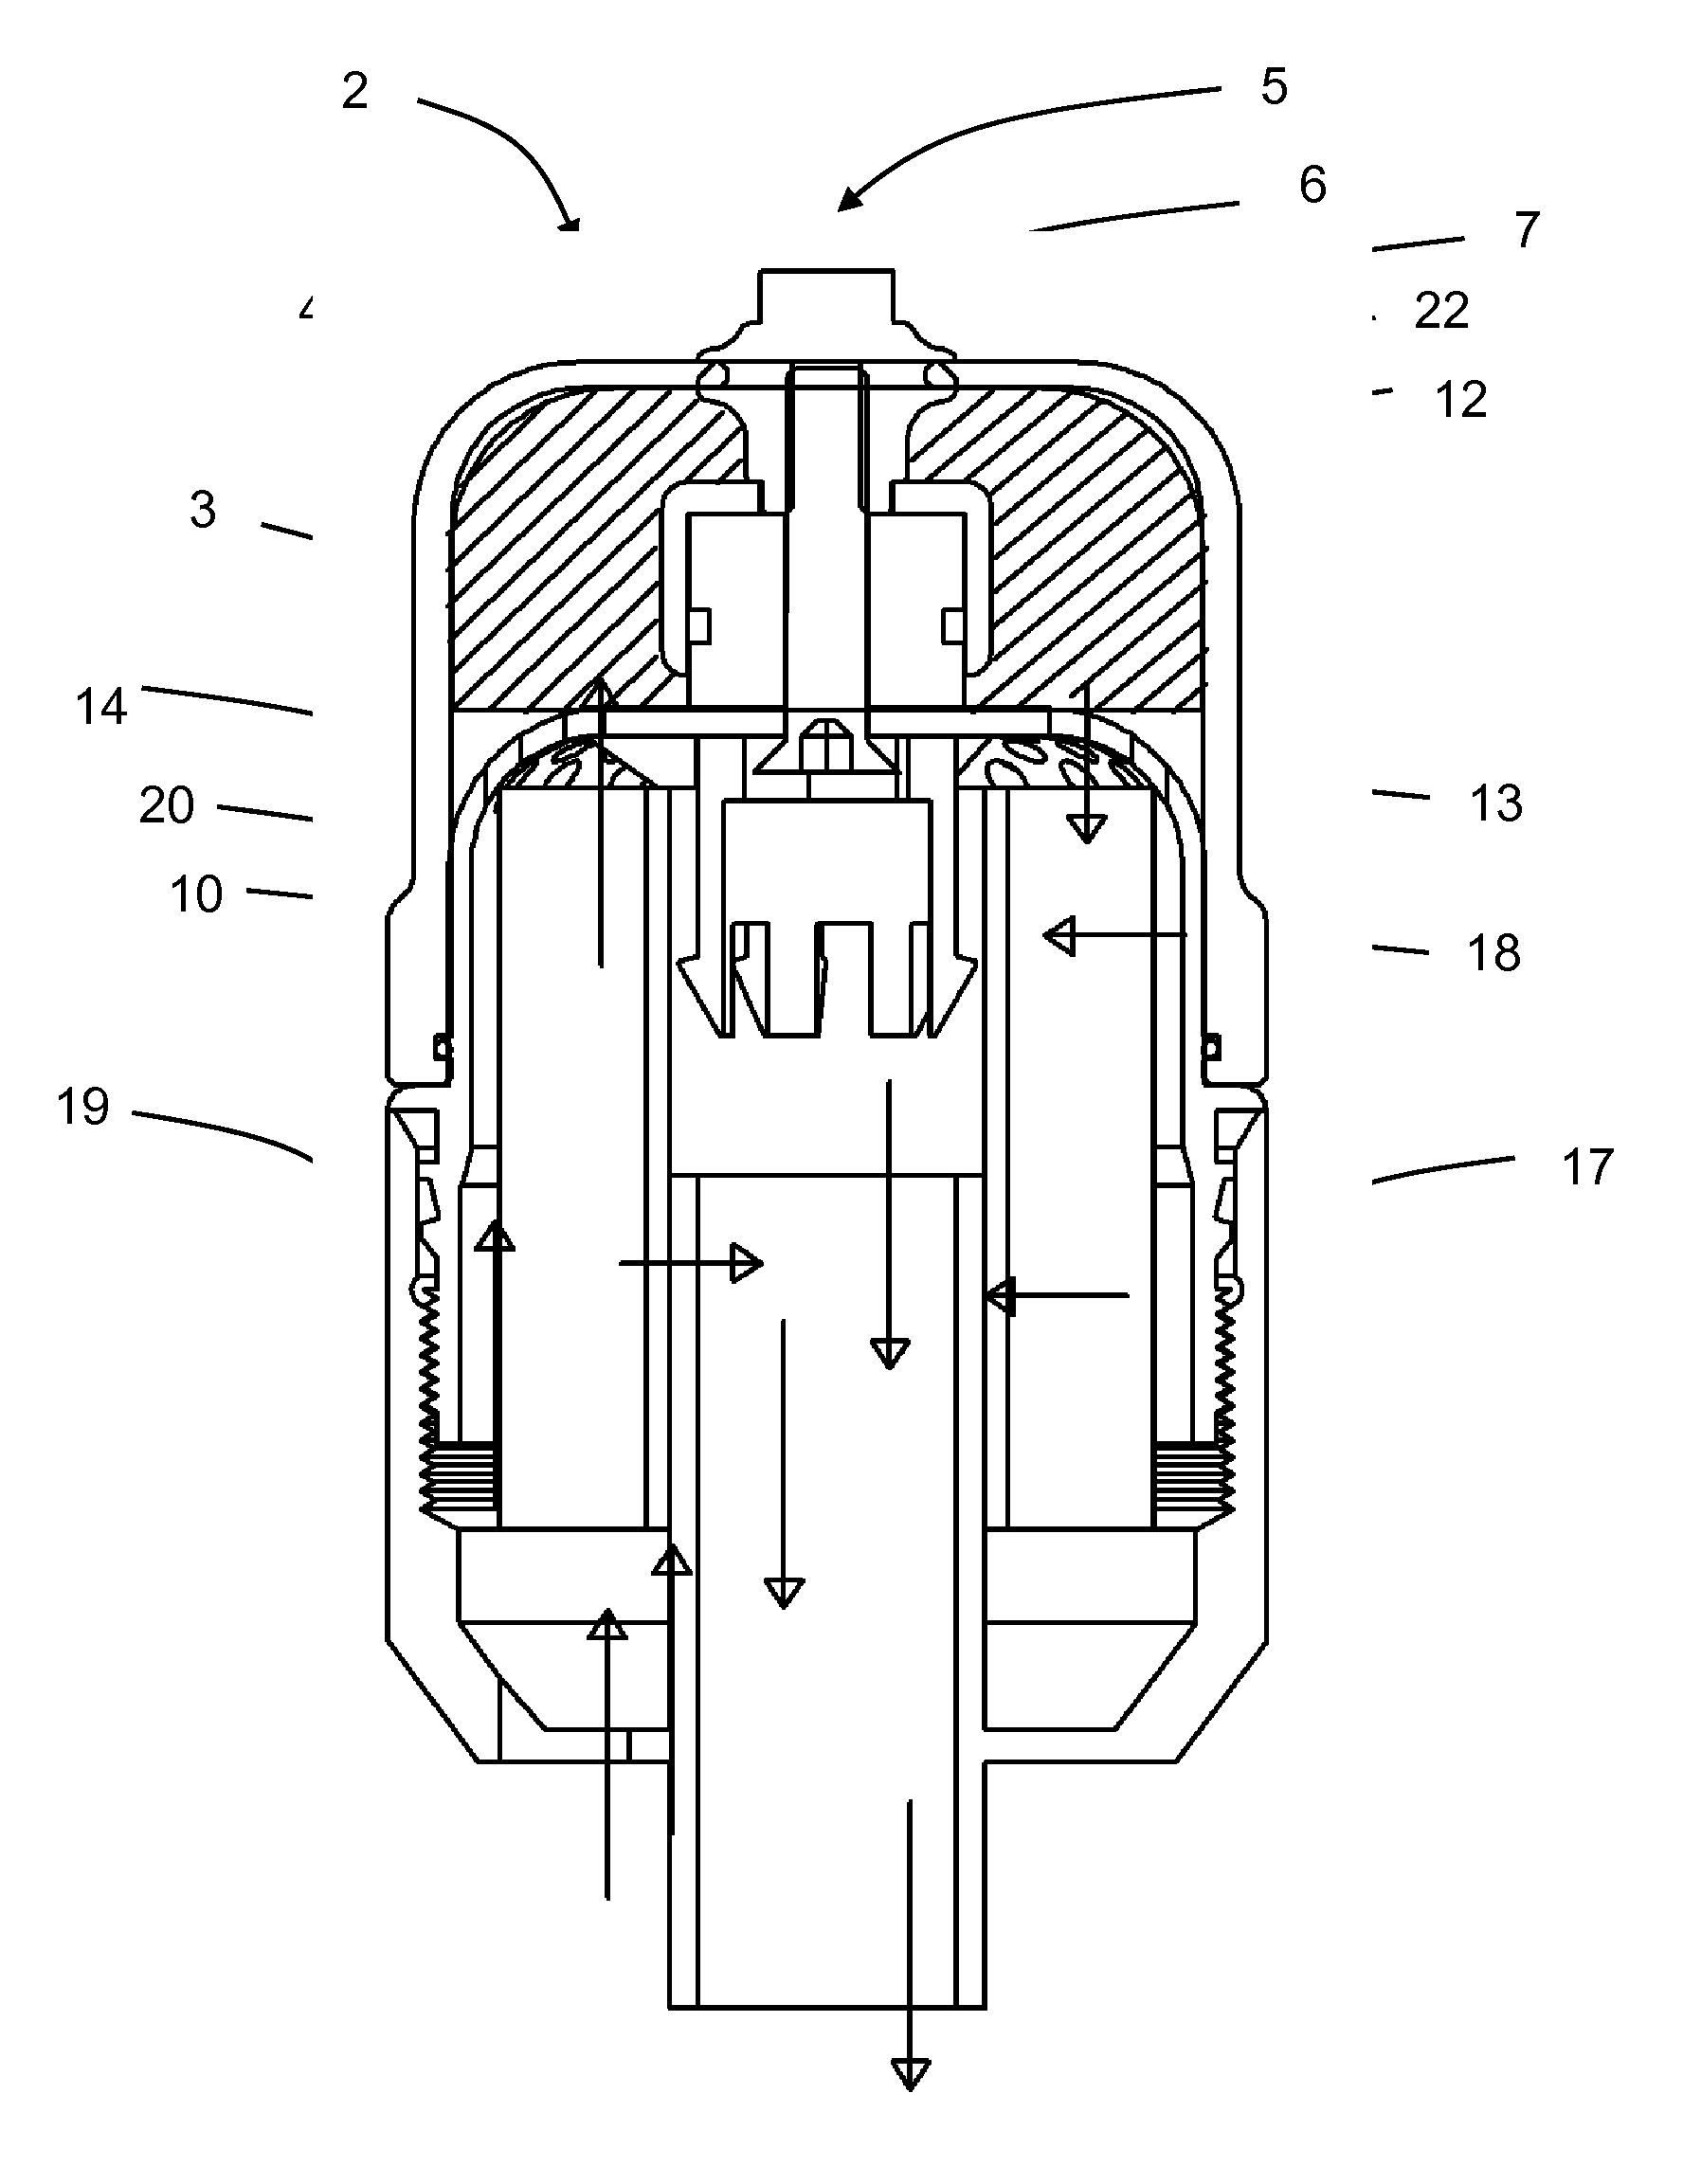 Filter Cap Additive Delivery System